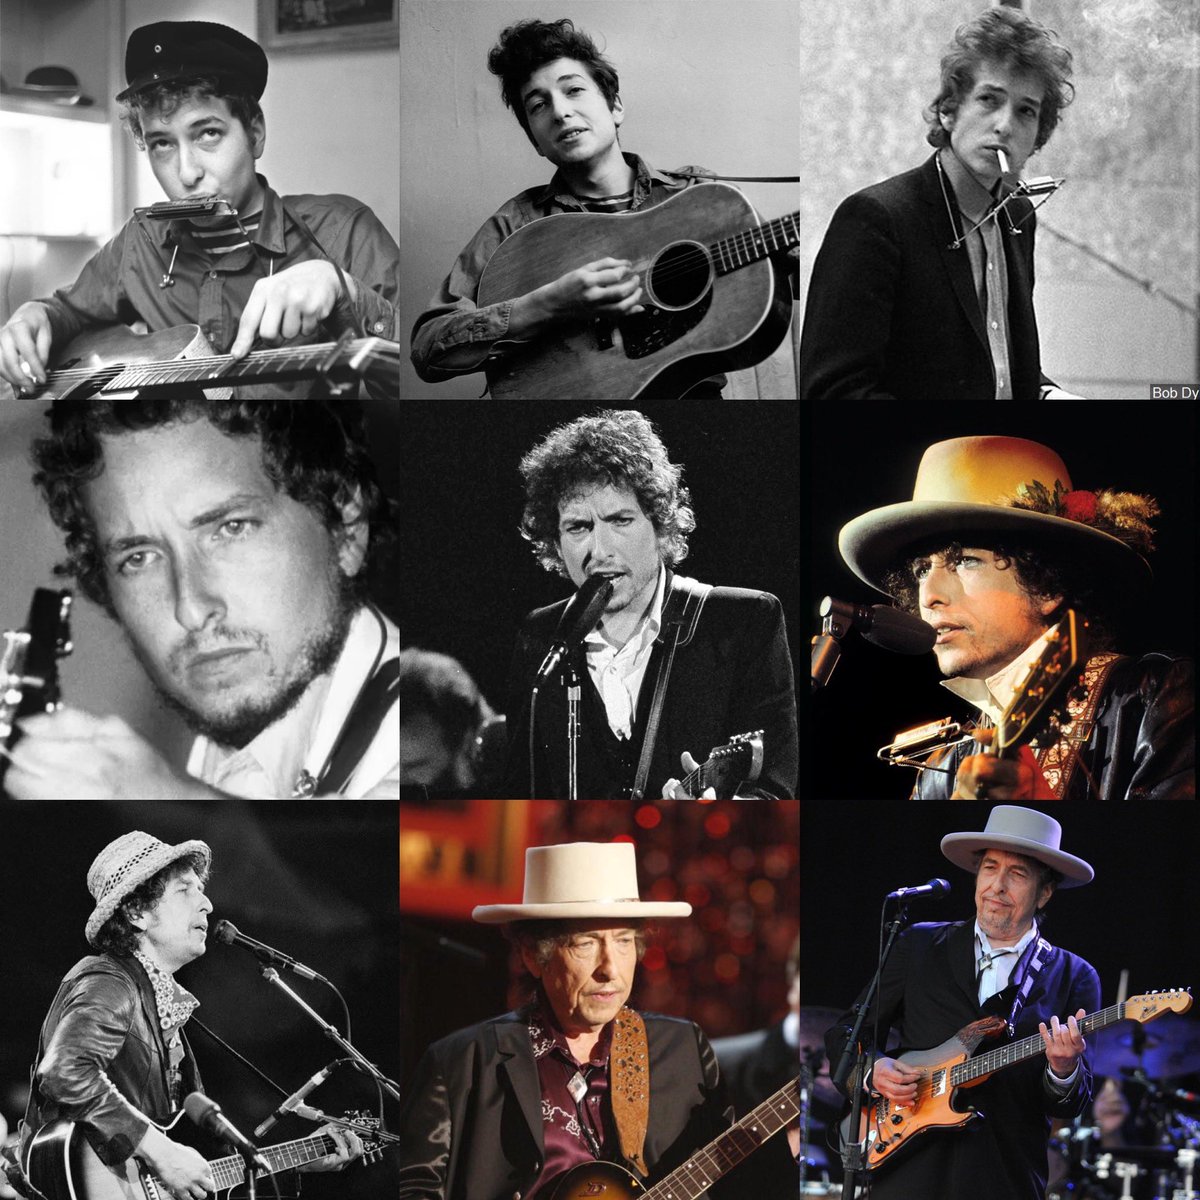 May your hands always be busy
May your feet always be swift
May you have a strong foundation
When the winds of changes shift
May your heart always be joyful
May your song always be sung
And may you stay
Forever young

#HappyBirthdayBobDylan #BobDylanAt80 #BobDylan80